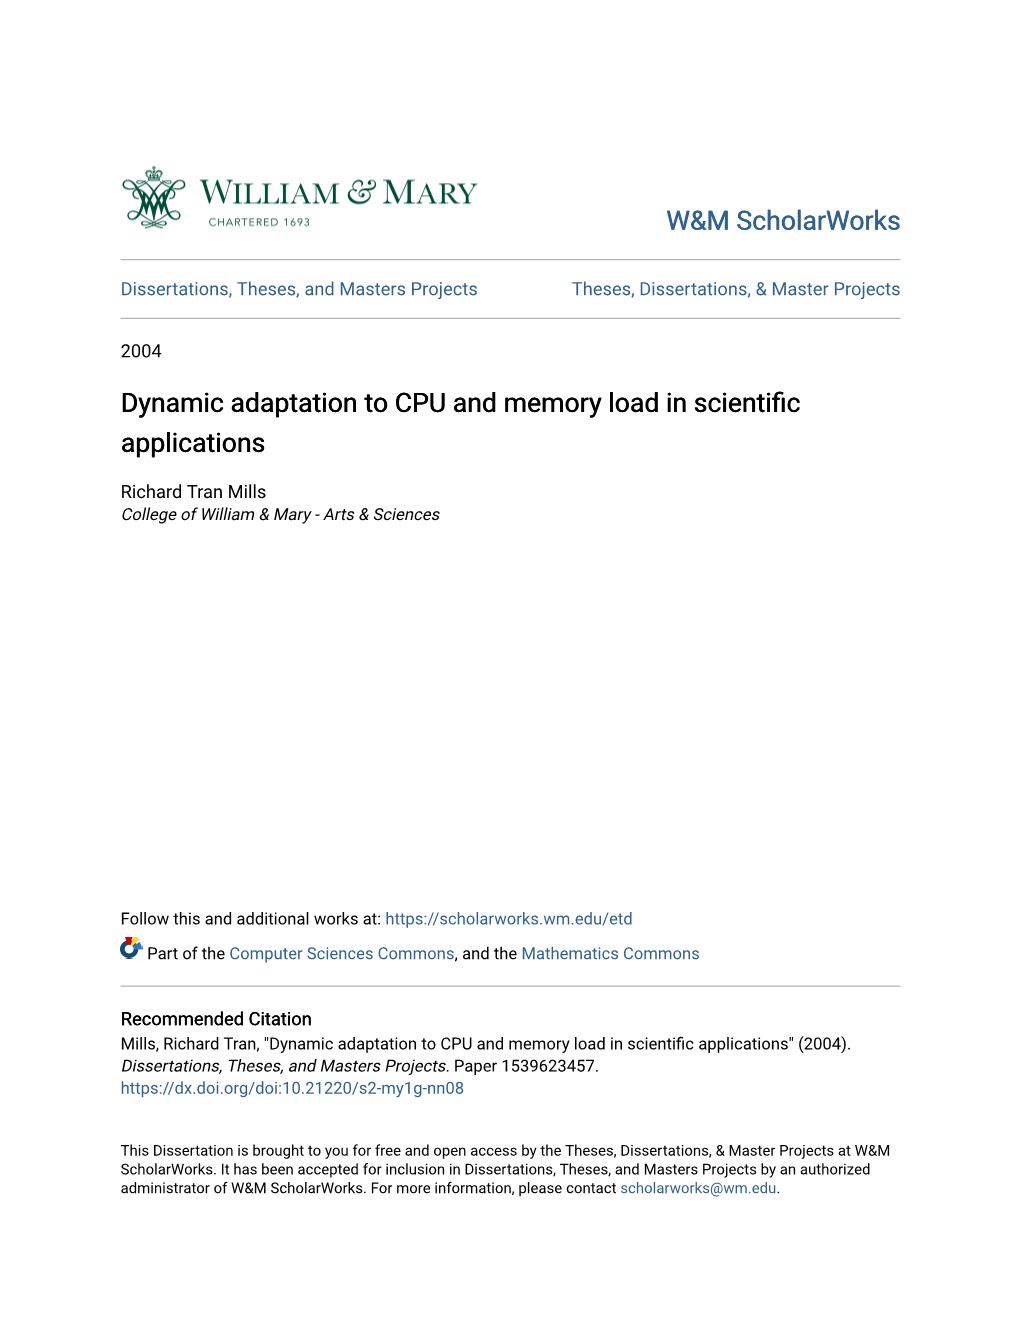 Dynamic Adaptation to CPU and Memory Load in Scientific Applications